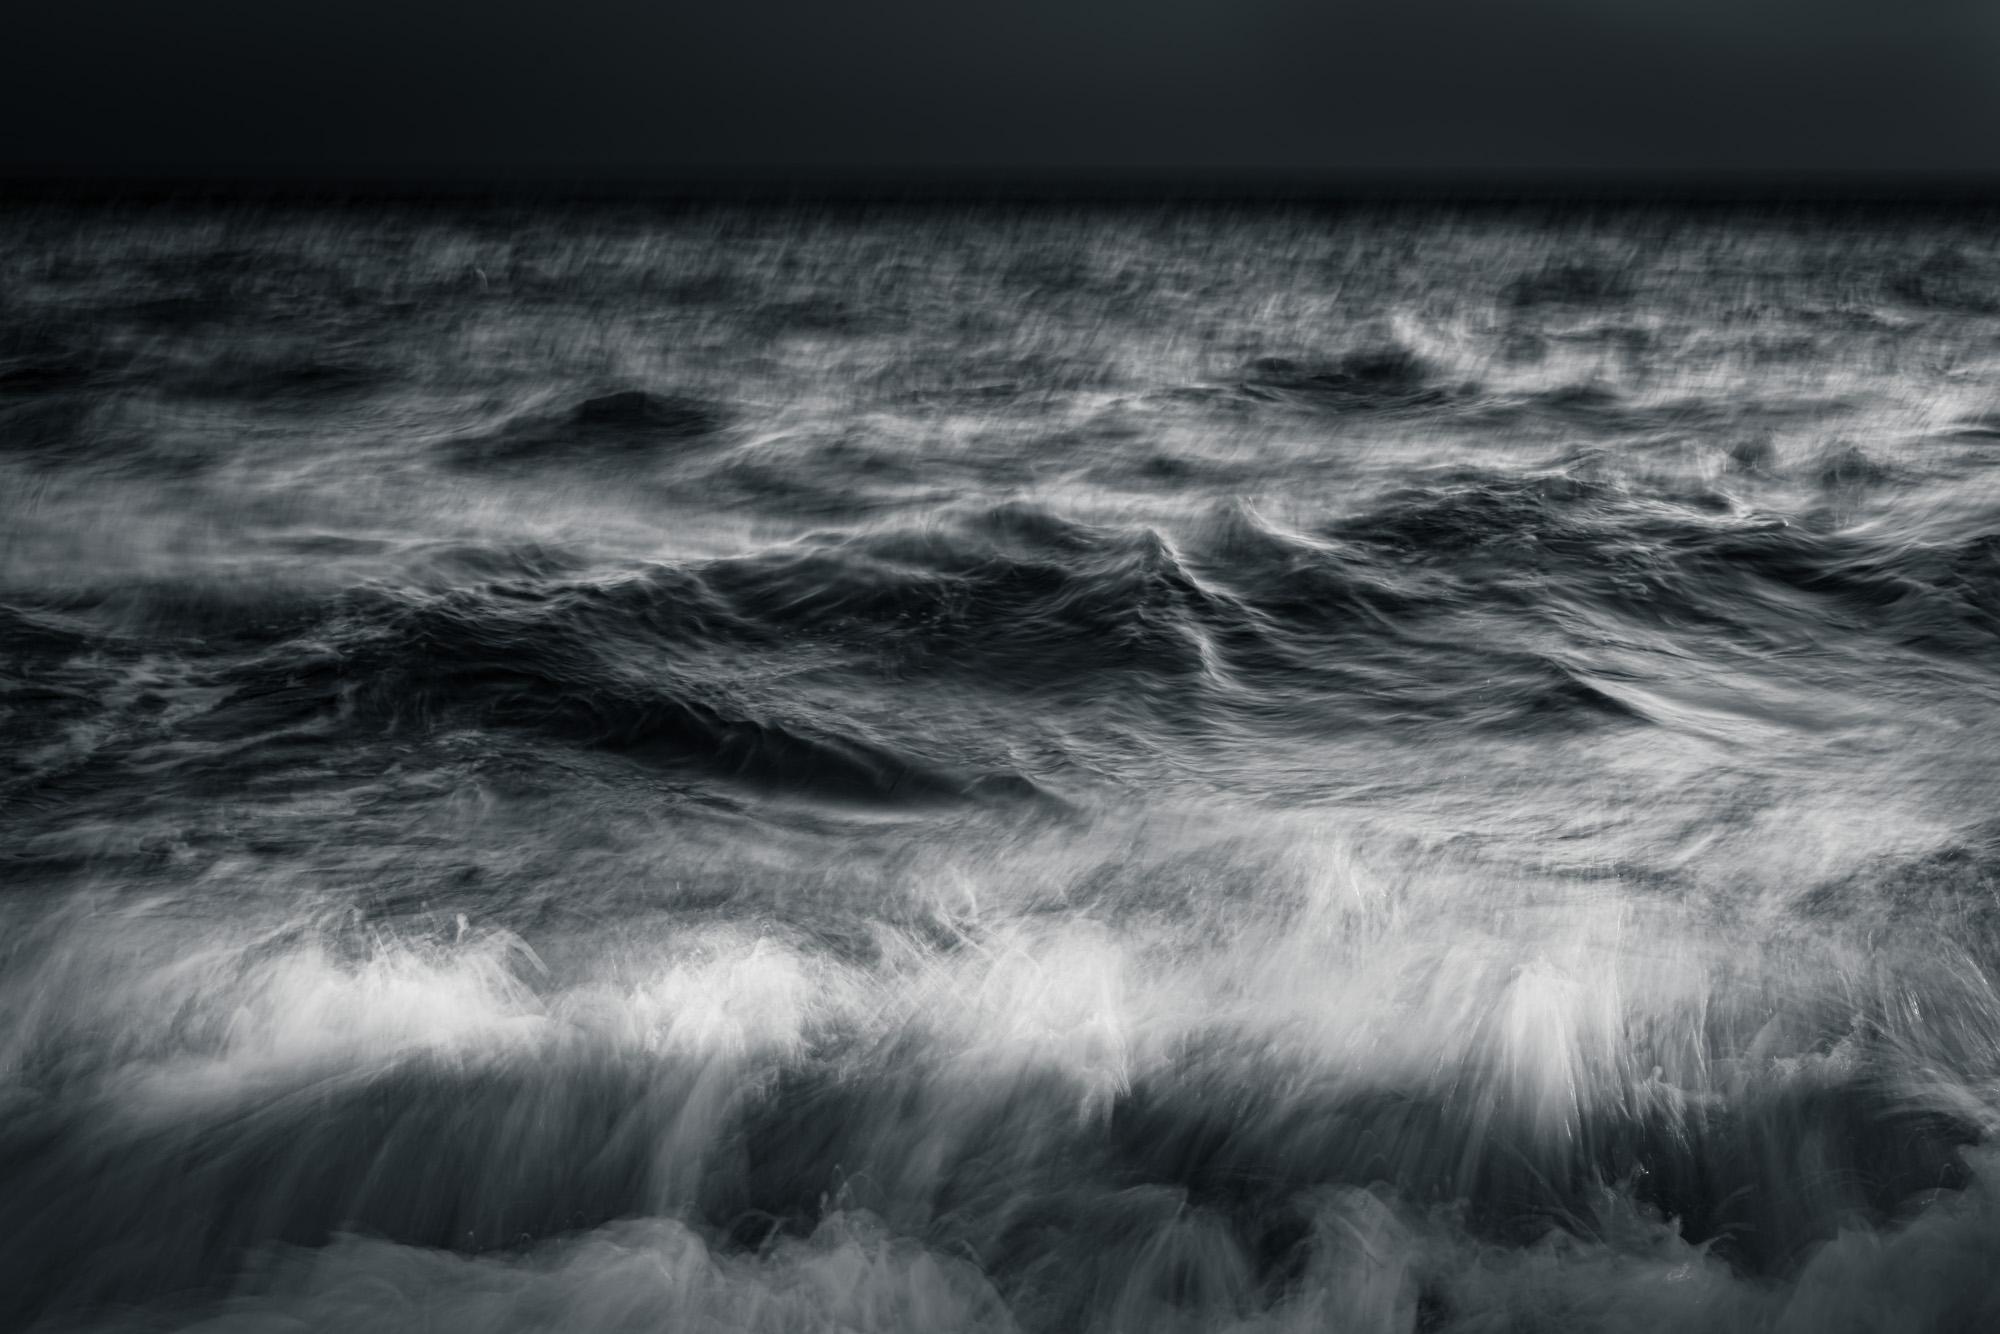 Limited Edition Black and White Photograph Ocean Ethereal #59

This is #59 from the Kinetic Solitude series. It has been shown in the Dow Museum of Fine Arts as part of a exhibition that explored variations on the theme of water.

My photographic